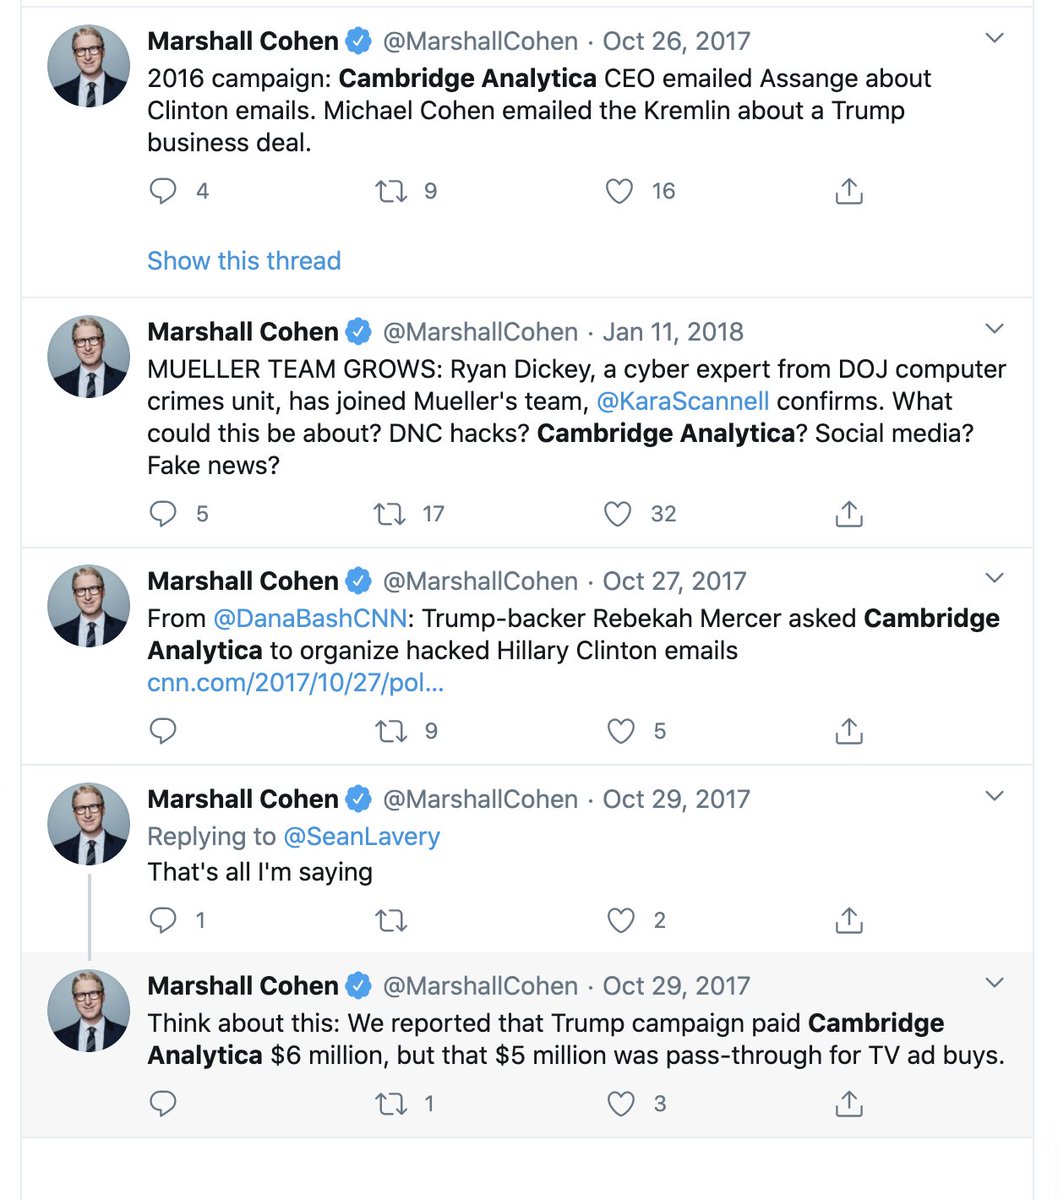 Here is what I wrote back then: https://www.nationalreview.com/2018/03/facebook-cambridge-analytica-scandal-melodrama/